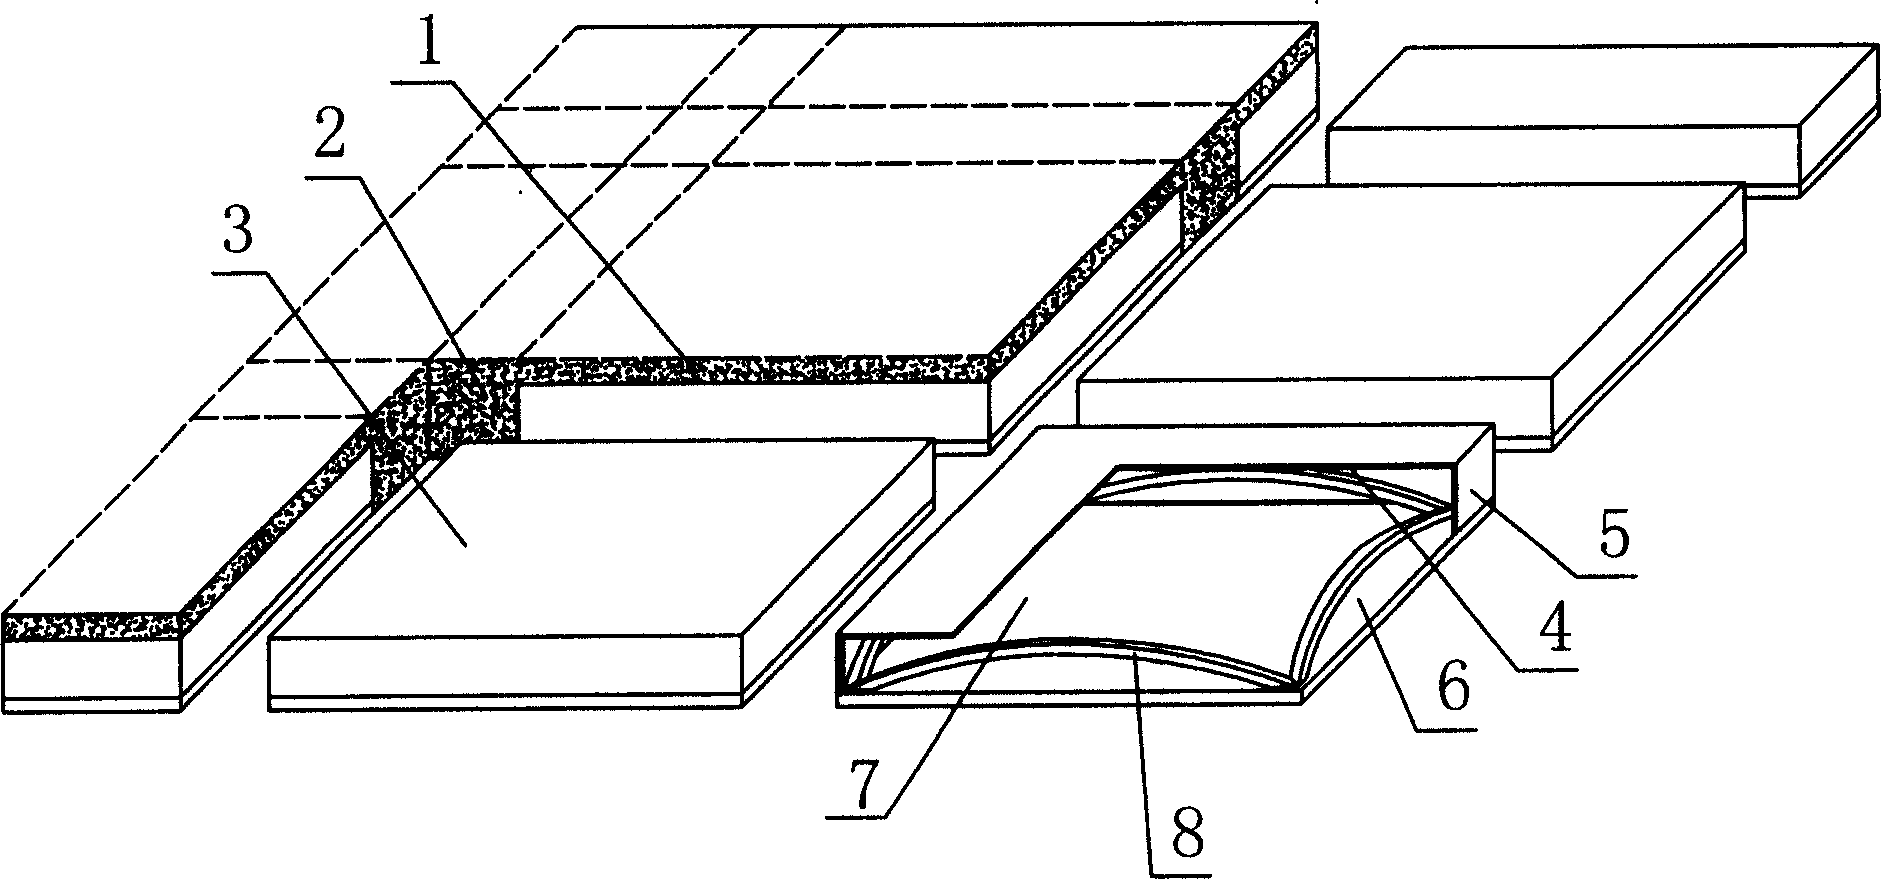 Reinforced concrete stereo load-carrying structure floor